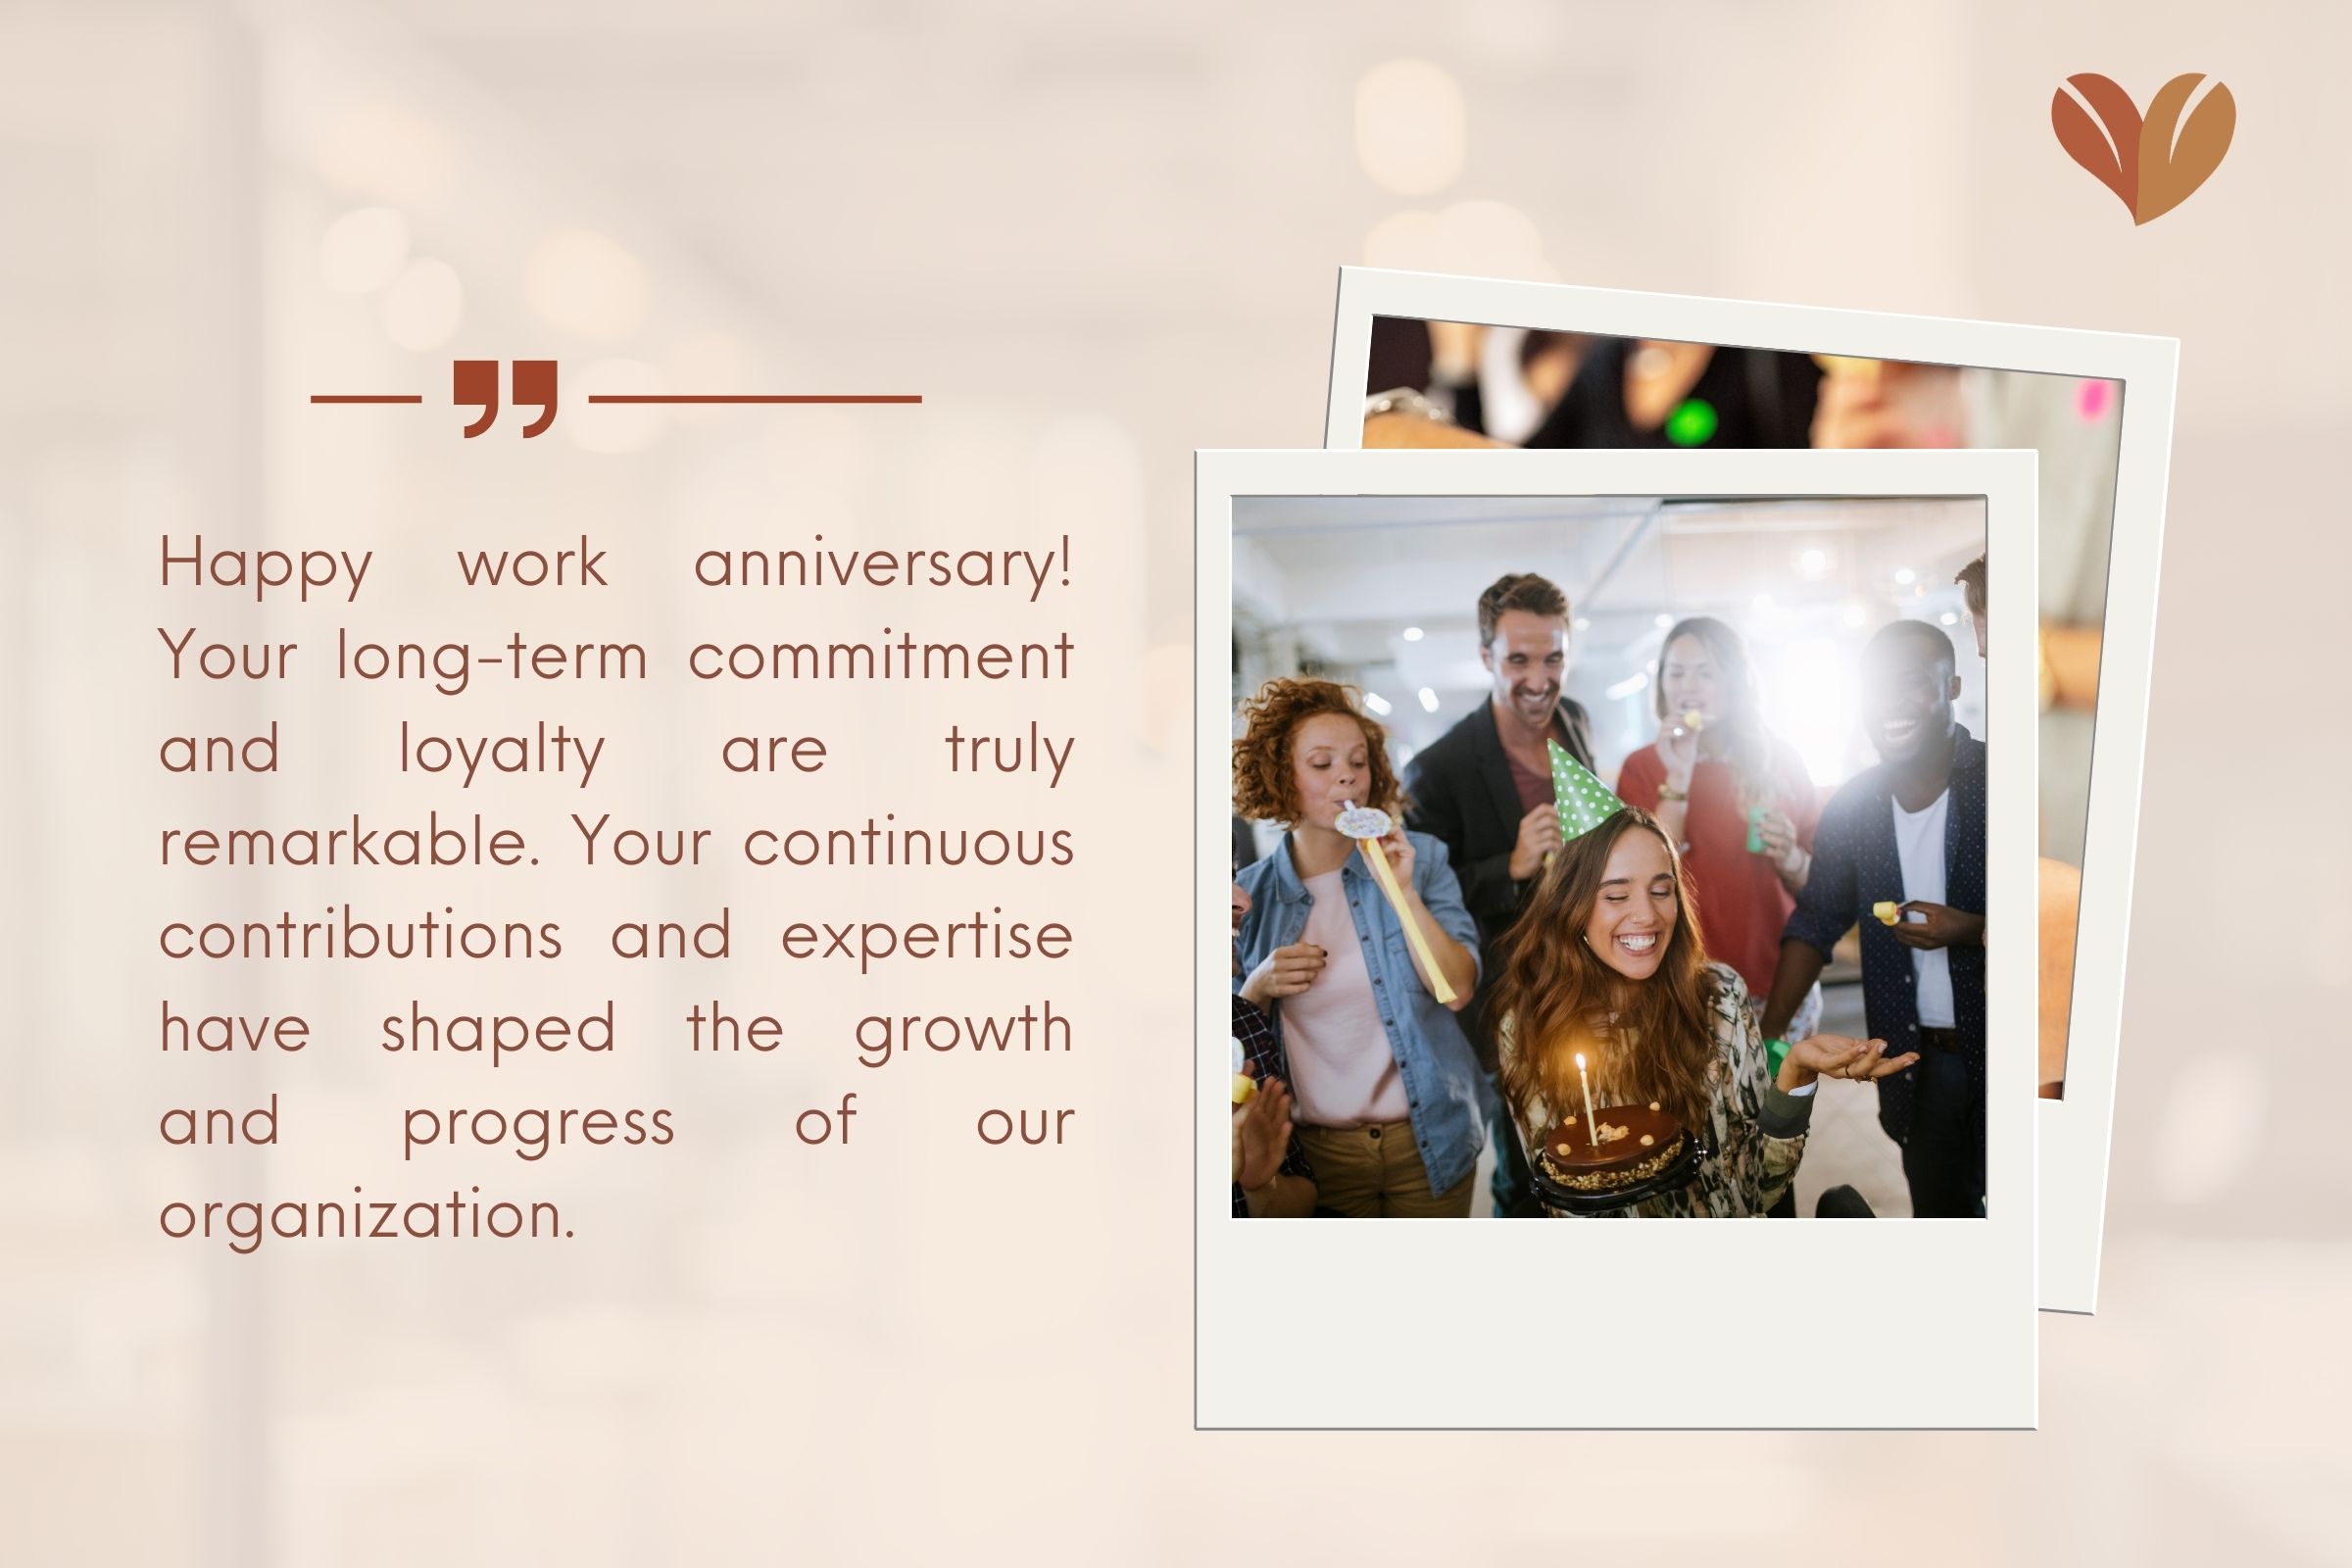 Work anniversary messages for long-term employees